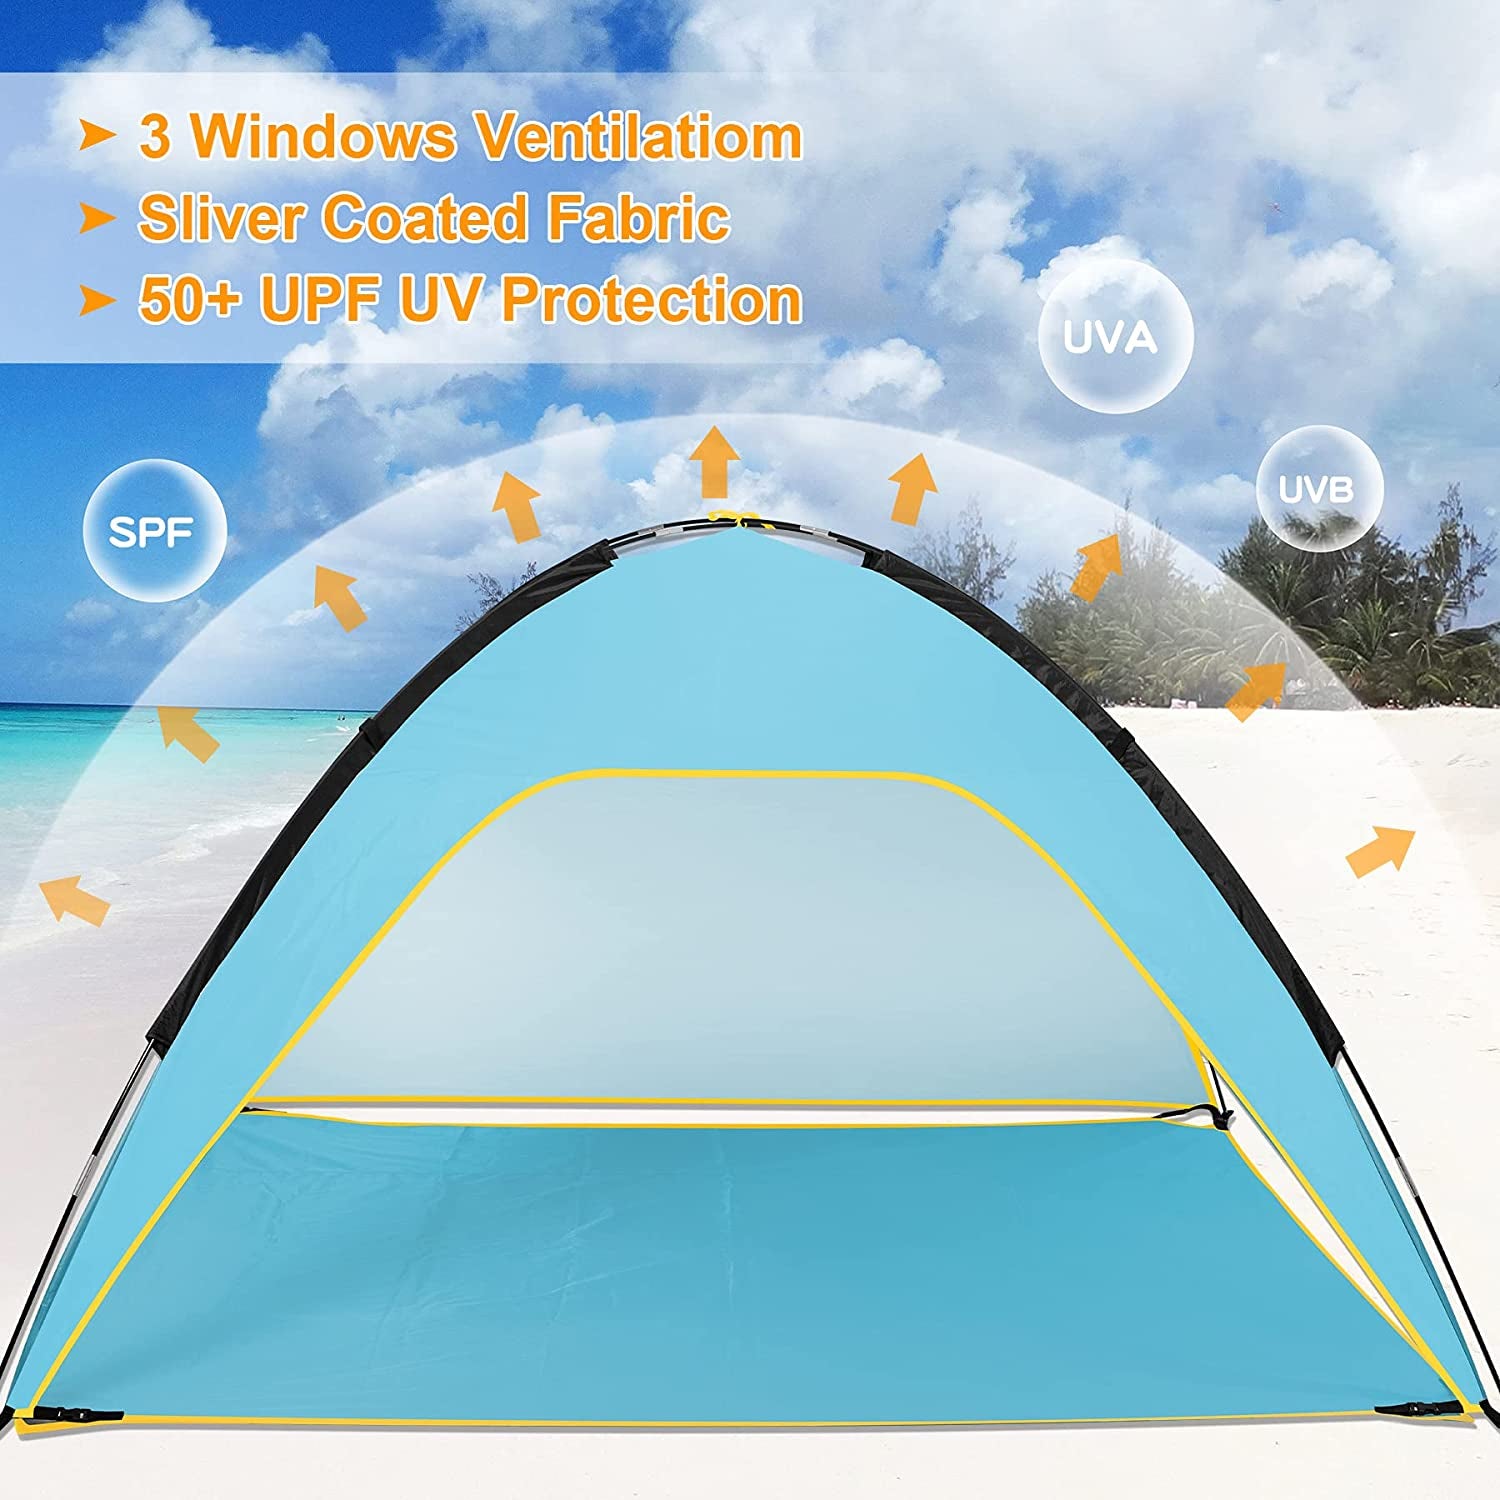 Fltom Beach Tent, Portable Beach Sun Shelter for UPF 50+ UV Protection, Easy Set up 3-4 Person Beach Tent Shade with Carry Bag, anti UV Beach Canopy Tent for Fishing Hiking Camping